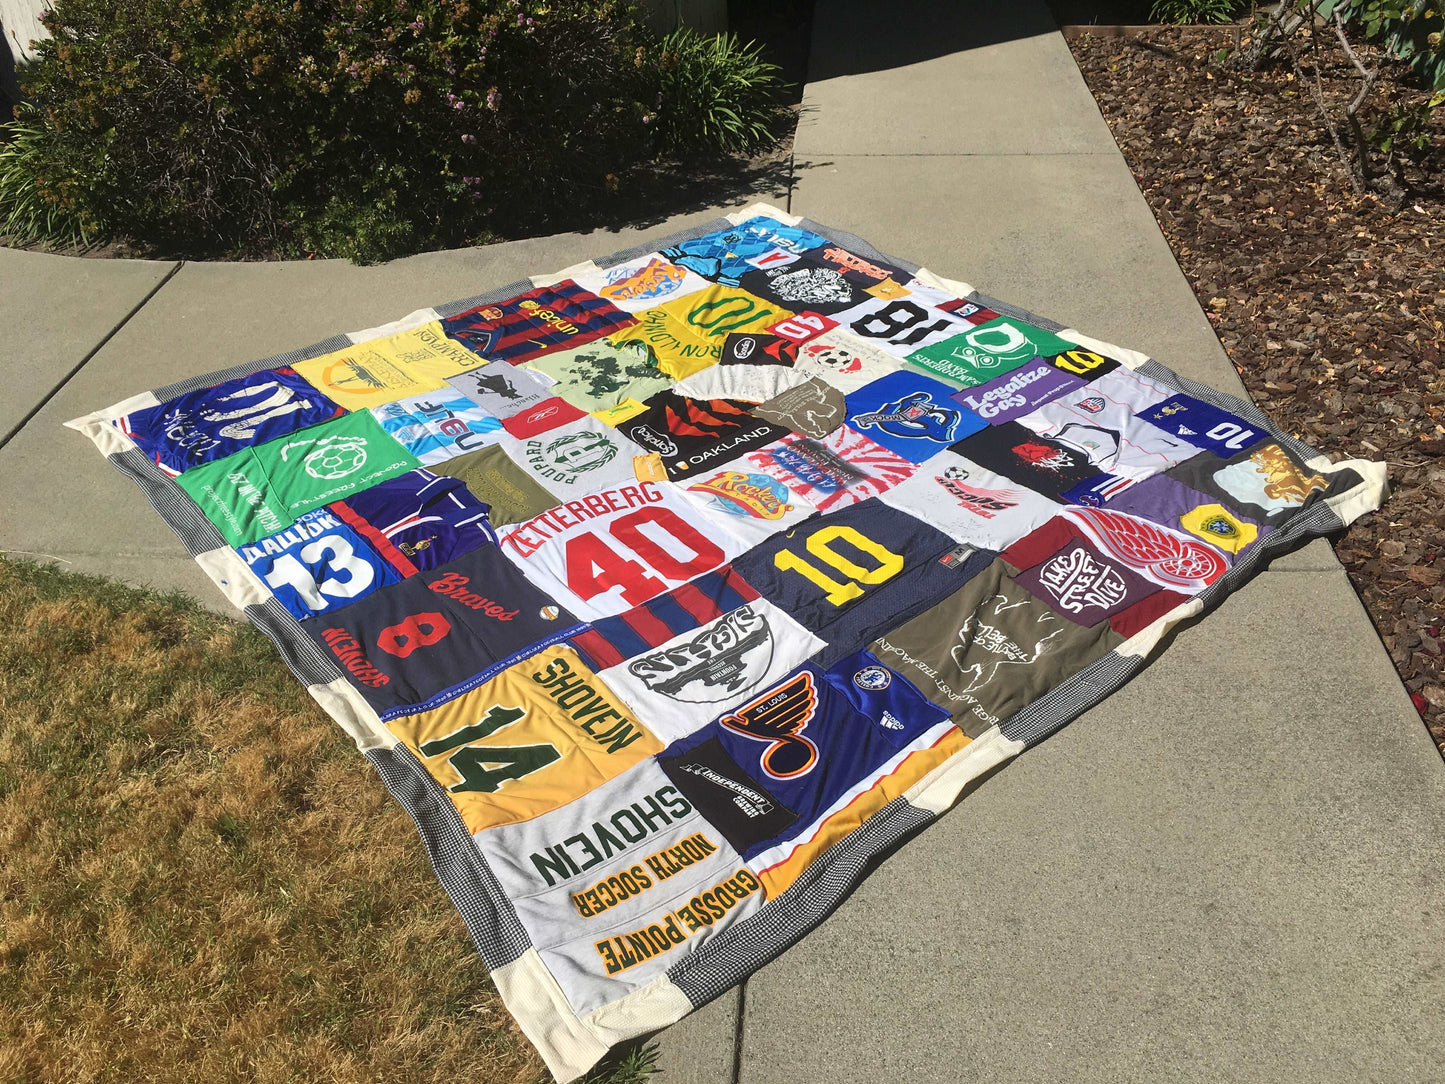 A queen sized quilt created out of Sports Jerseys and tee shirts, is outside on a sidewalk. There are bushes and a lawn in view